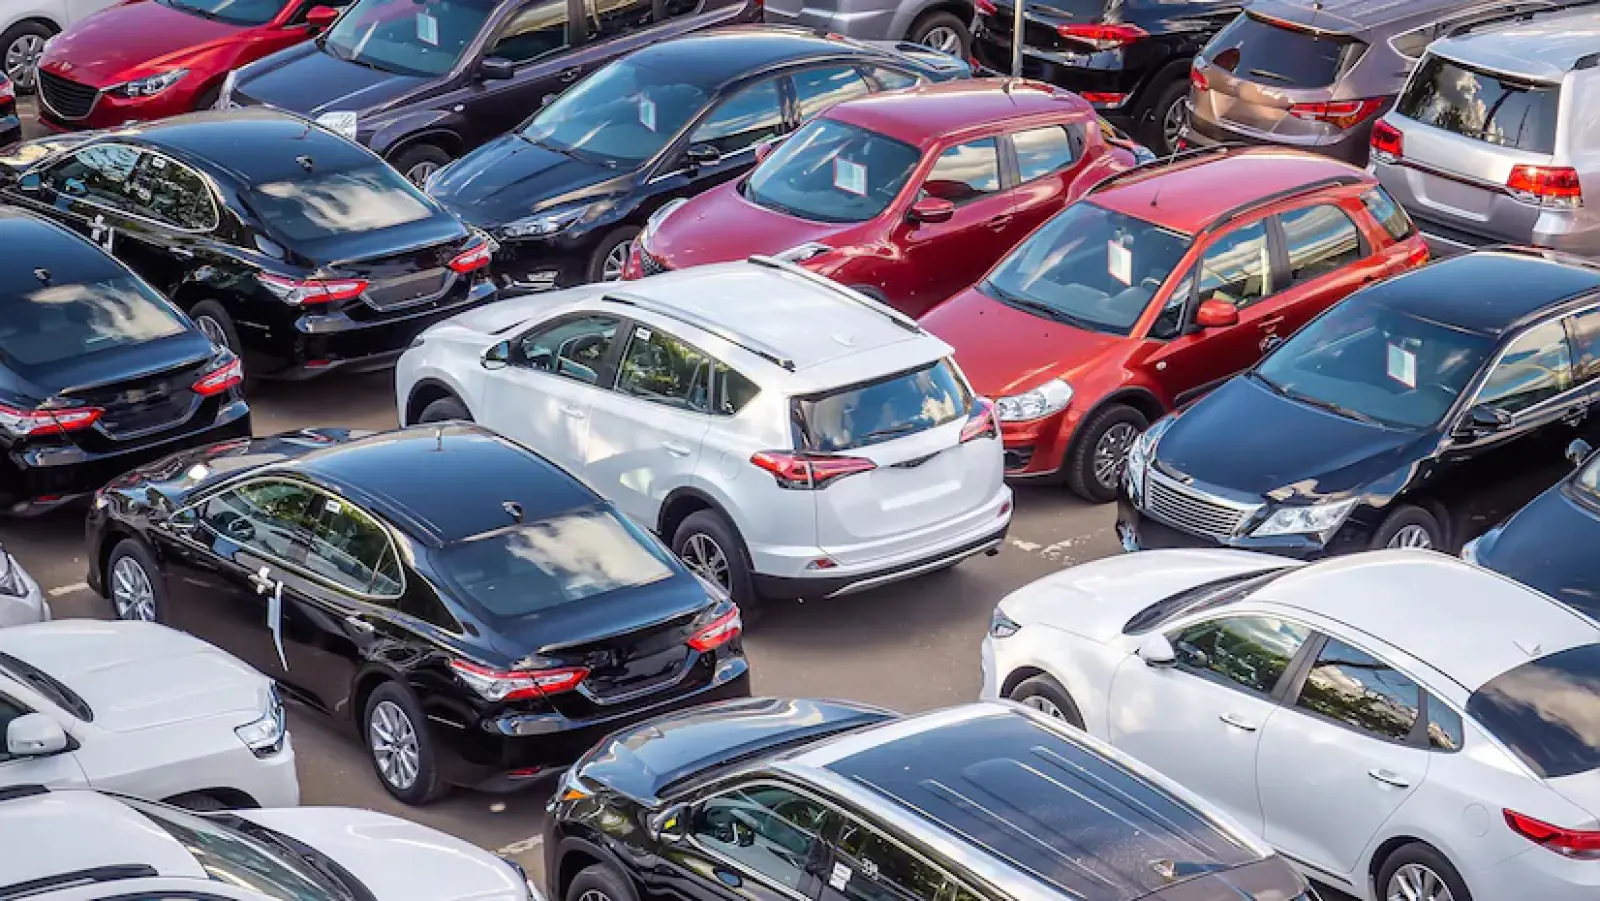 Domestic passenger vehicle retail sales grew 4% in May, SIAM released data